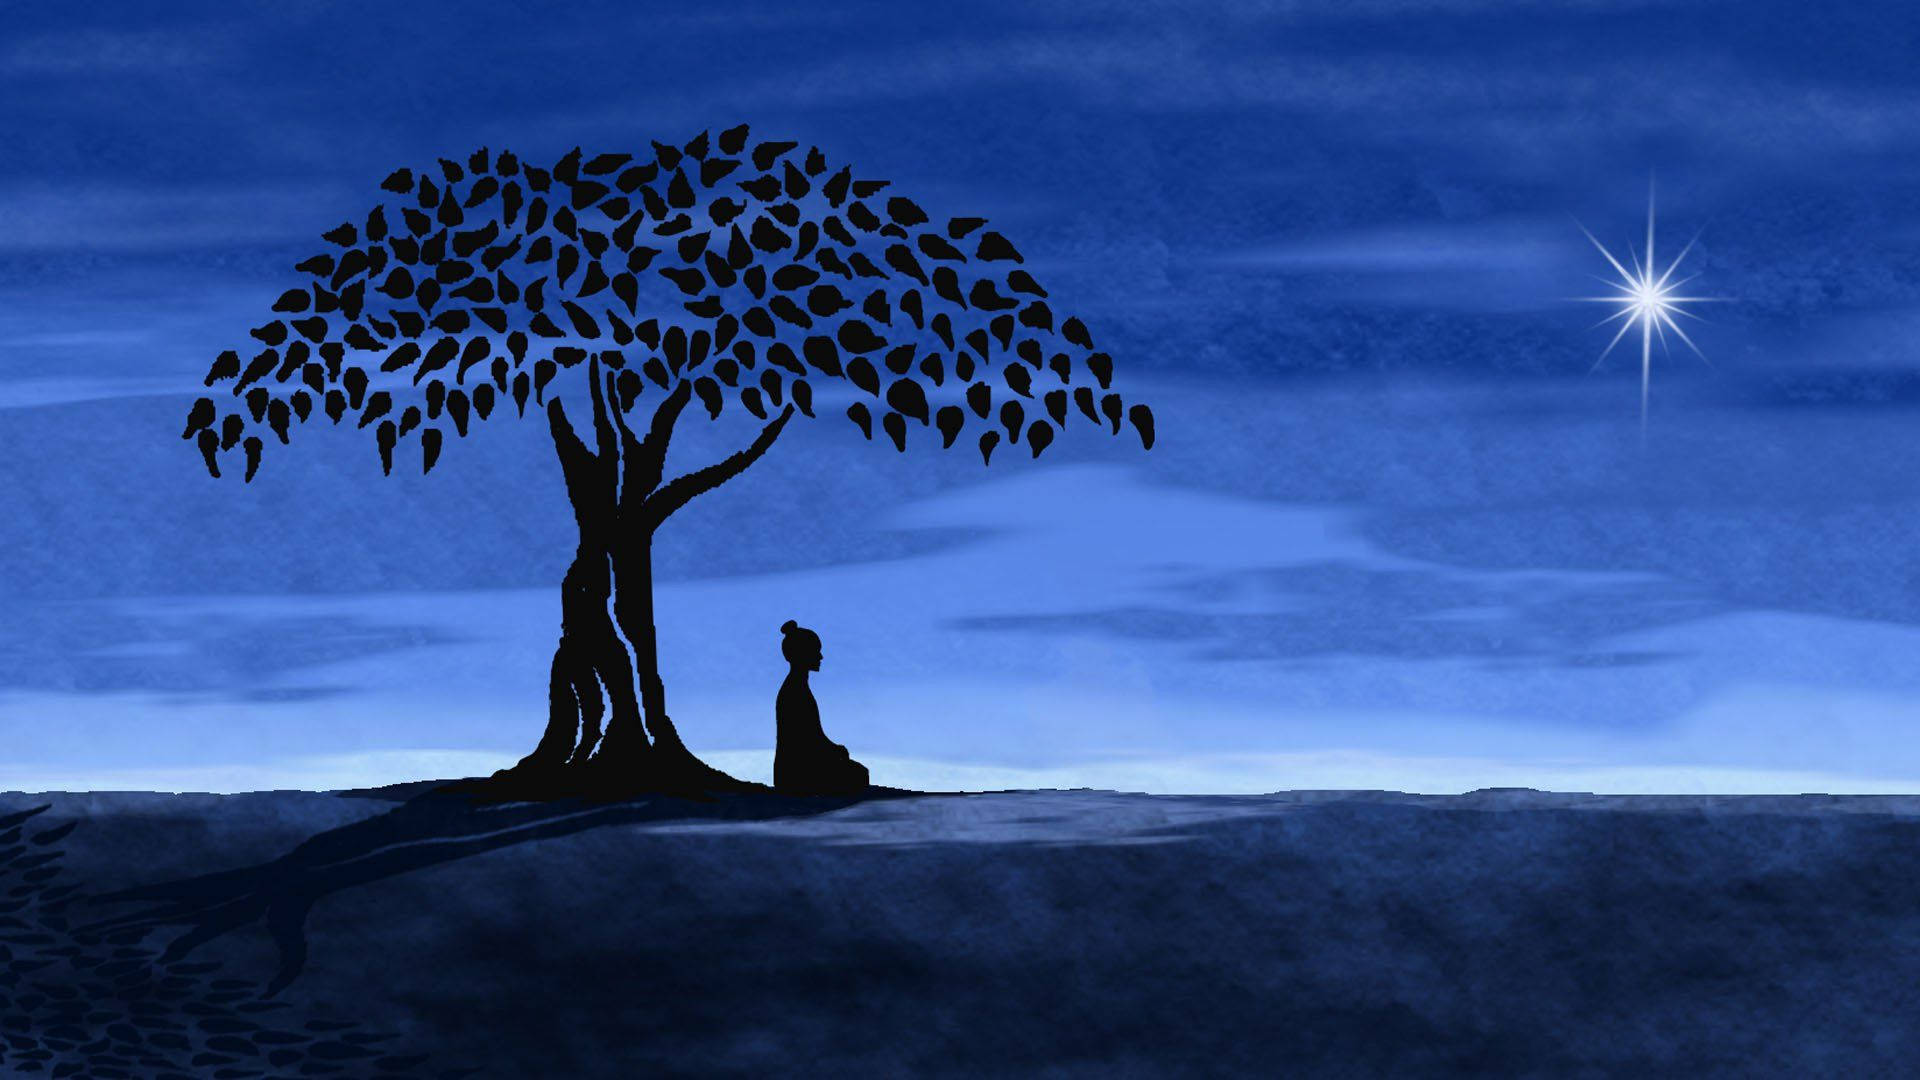 A silhouette of Buddha meditating peacefully under a tree. Wallpaper